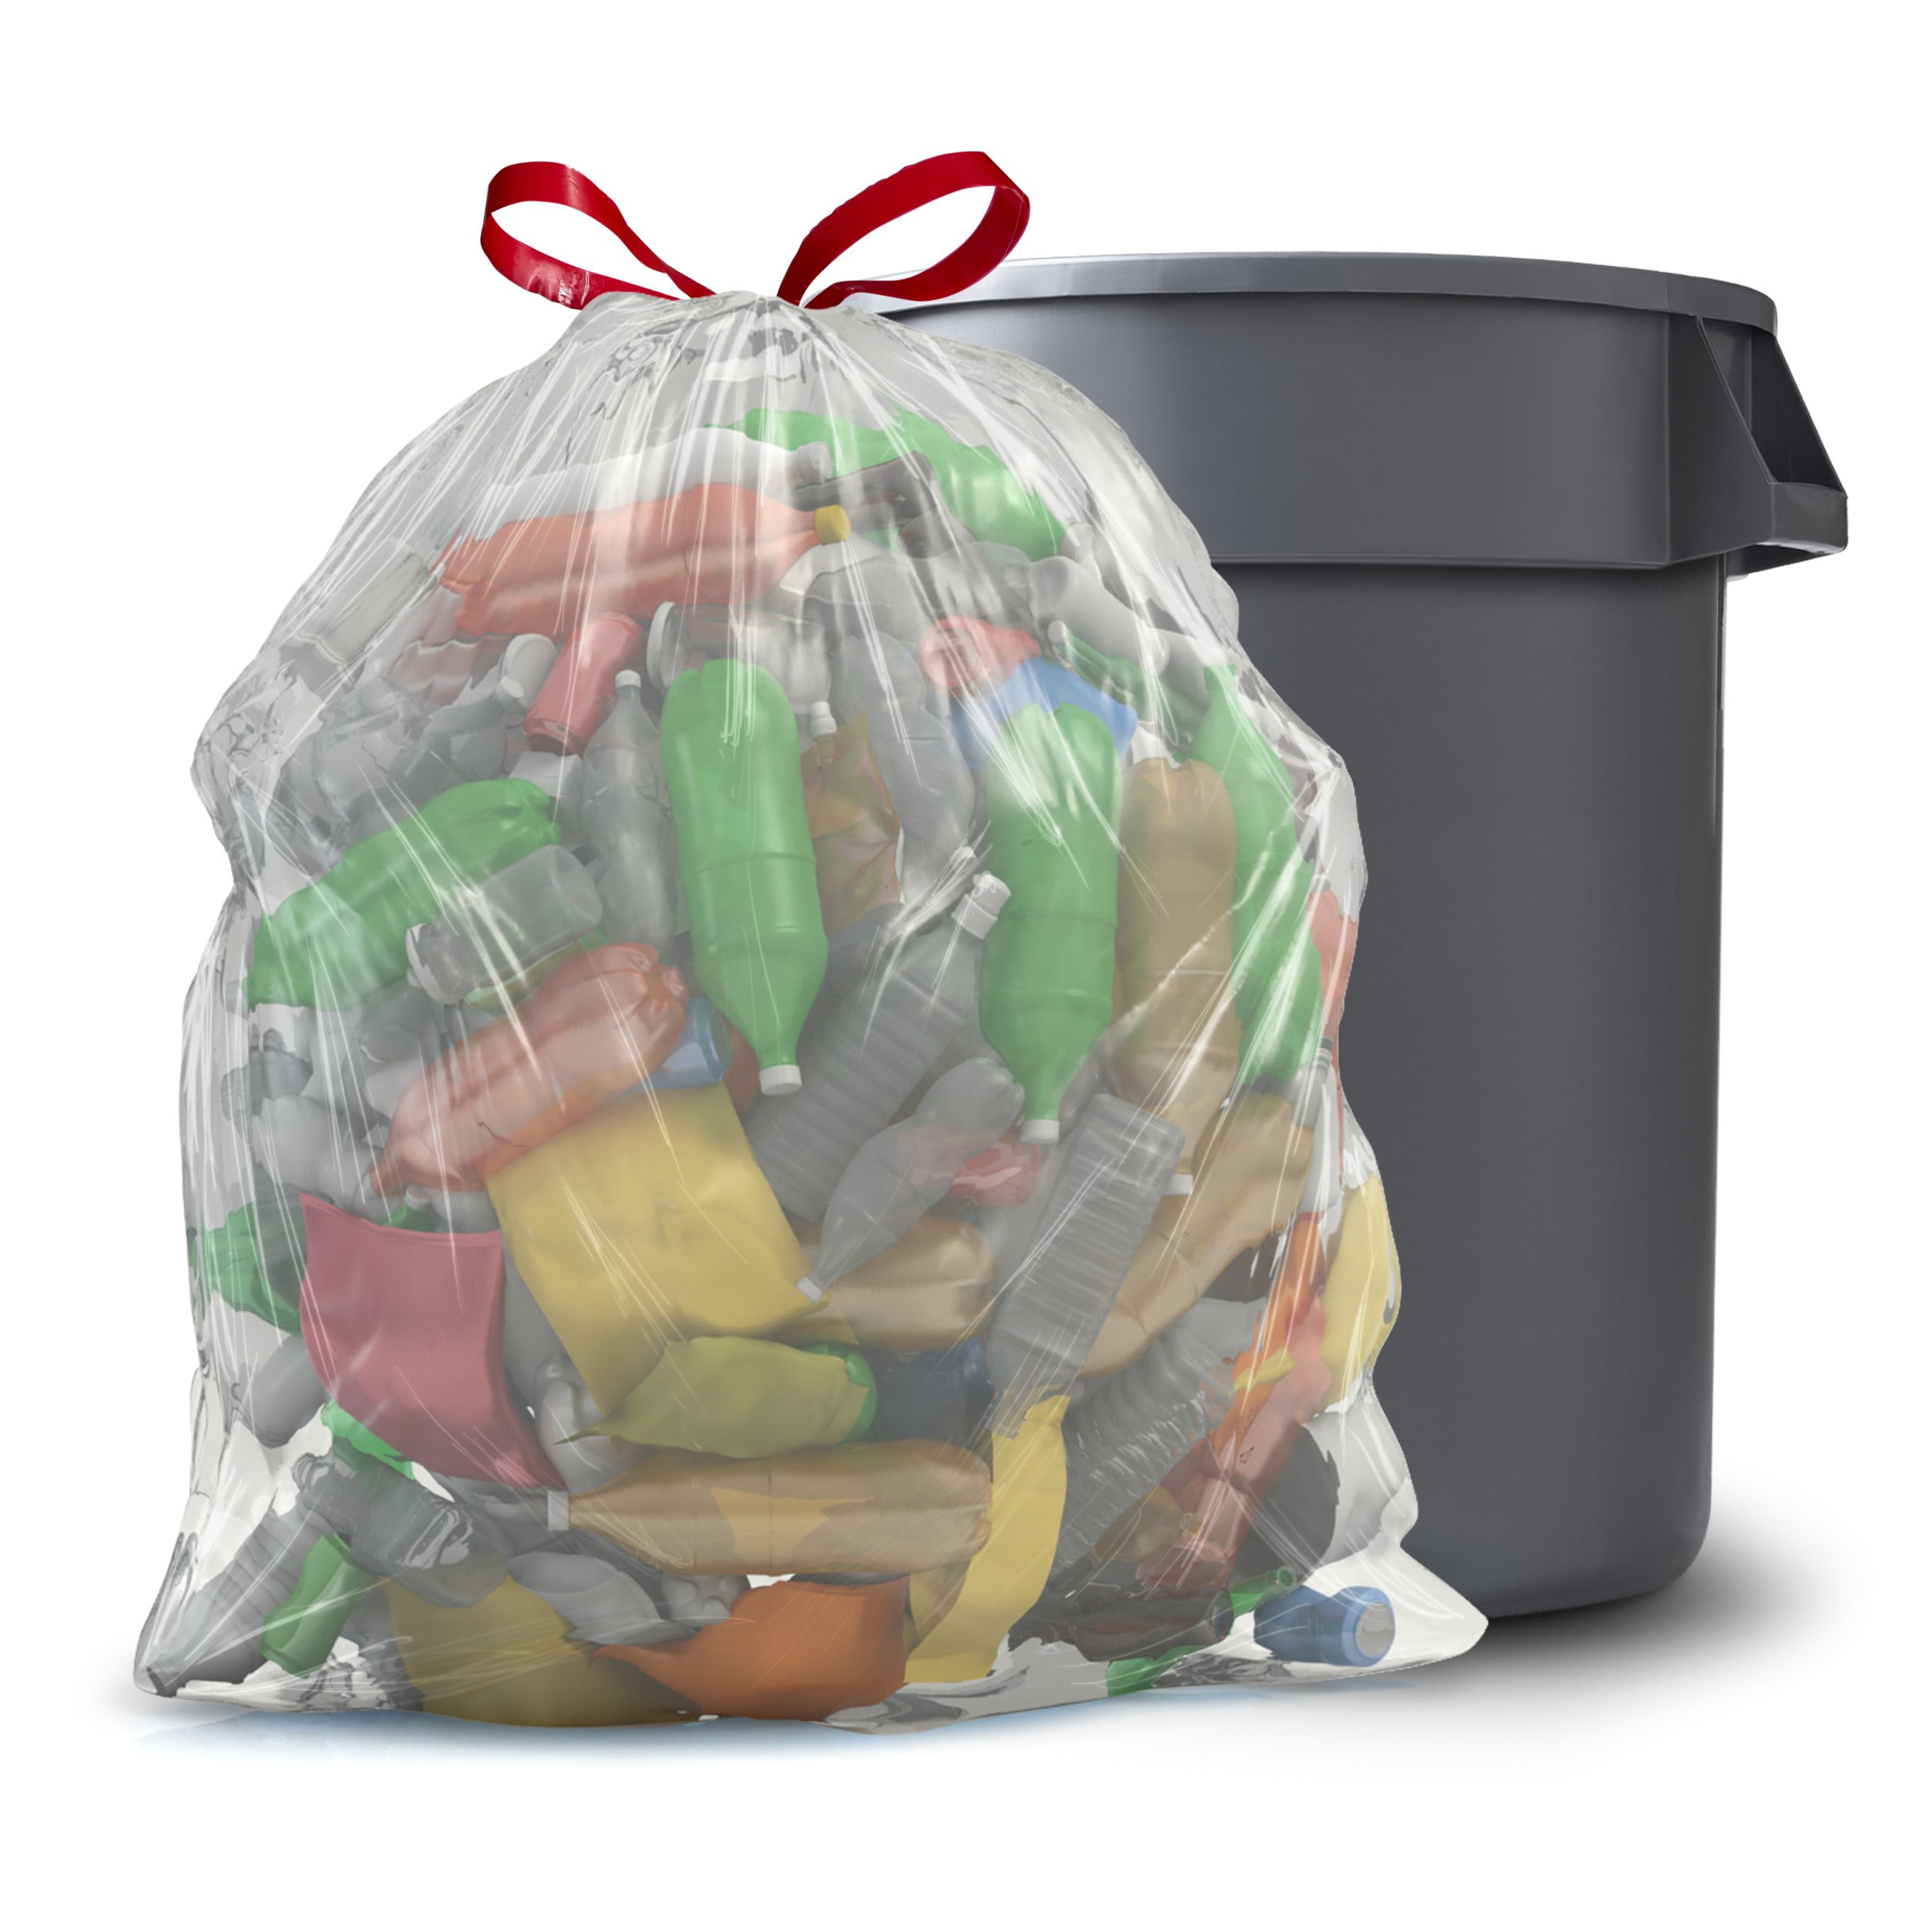 Trash Bags - 30 Gallon Clear Trash Bags with Ties 30 Count (Case Qty: –  Pans Pro